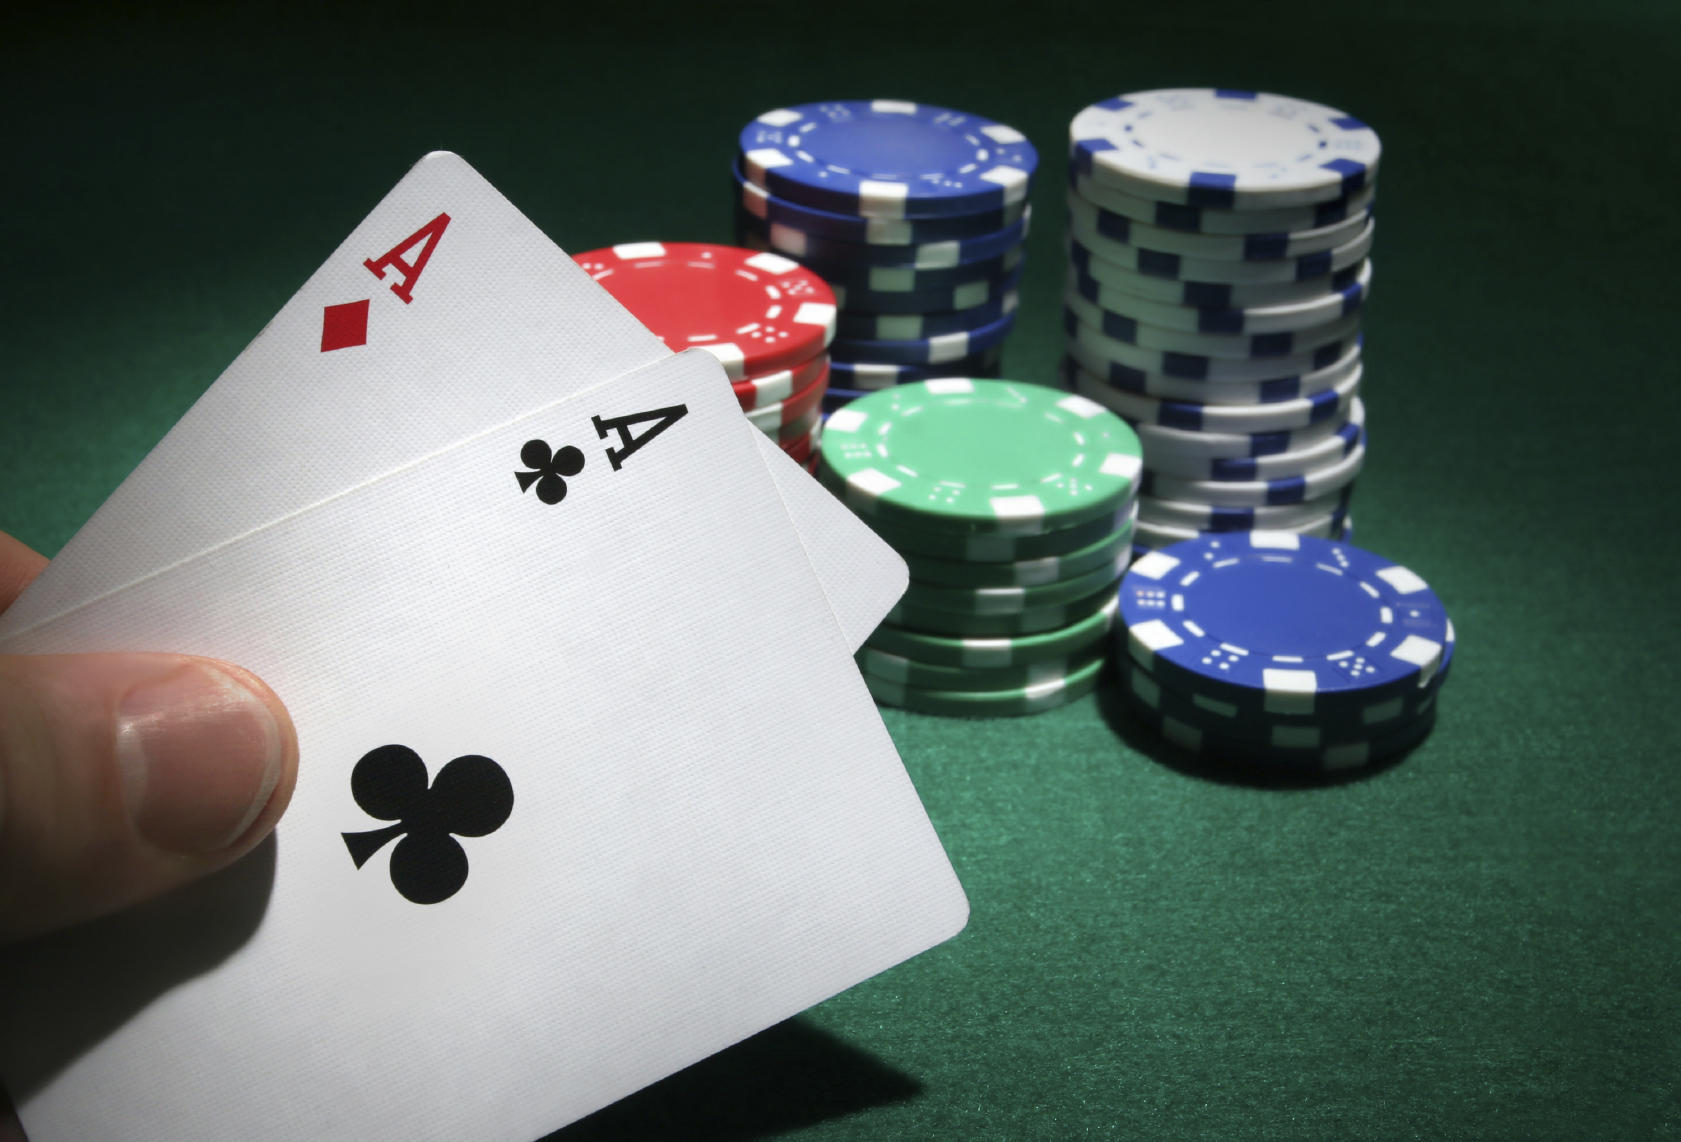 online casinos for real money